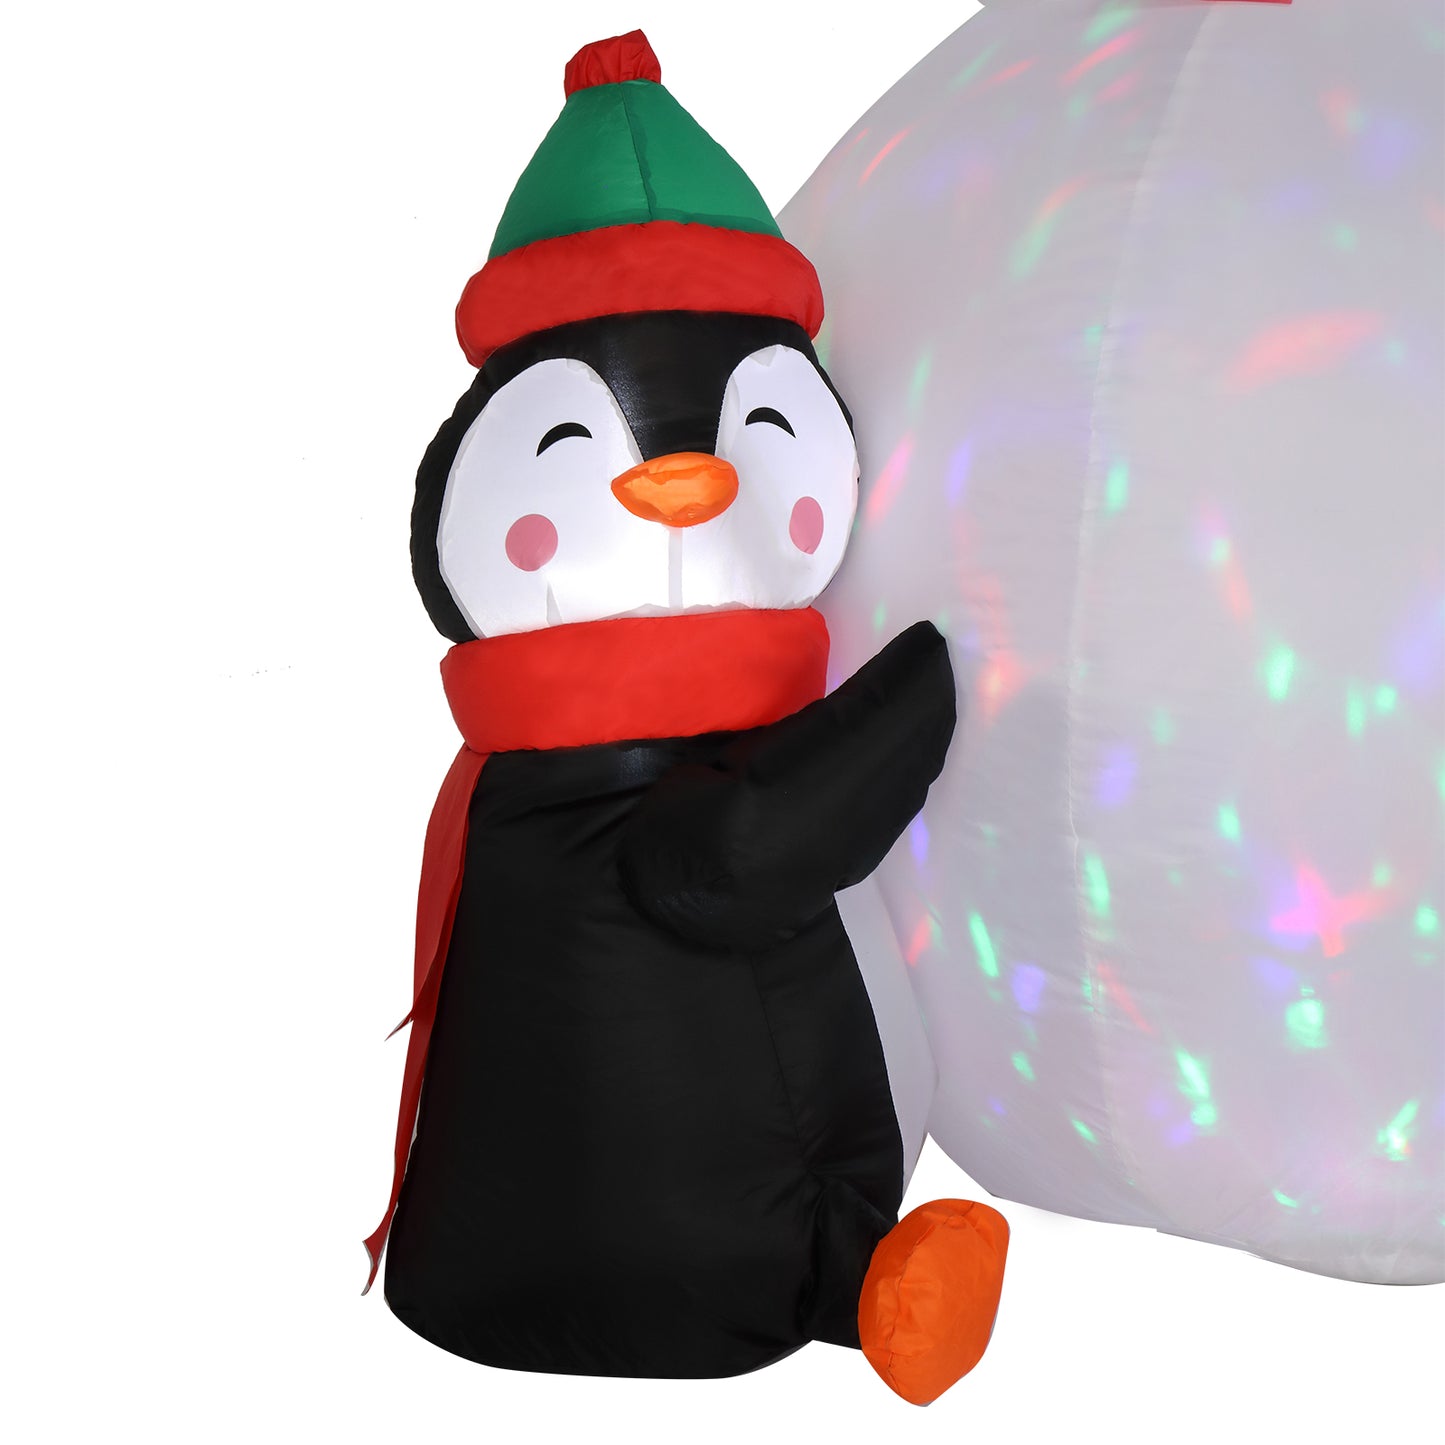 6ft With 3 Penguins, 4 Light Strings, 1 Colorful Rotating Light Inflatable